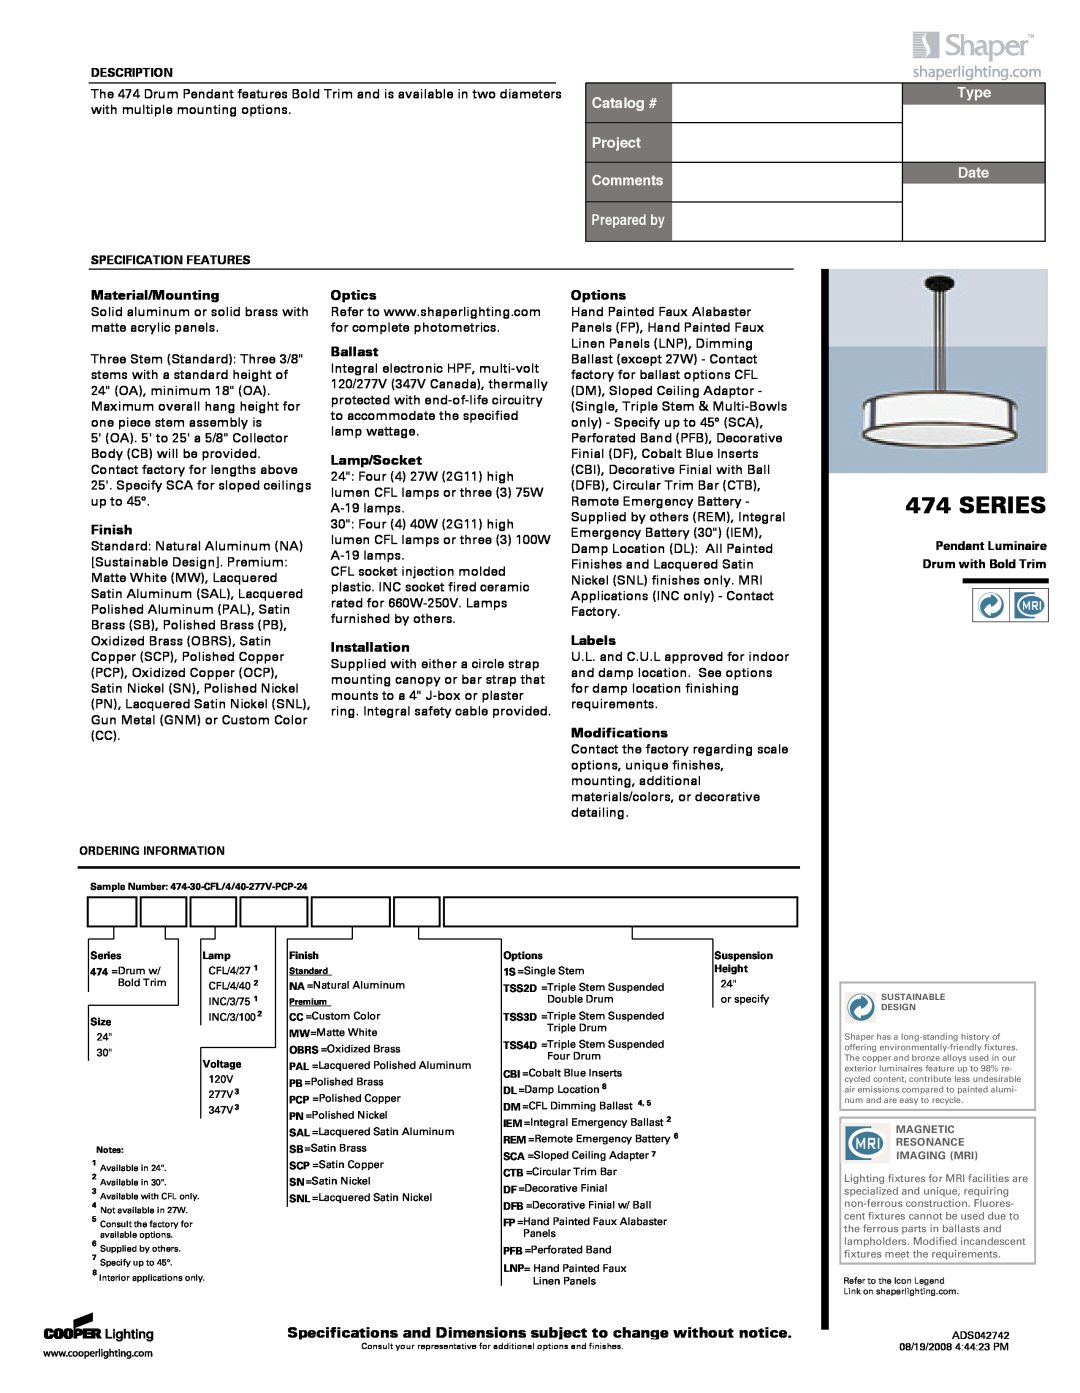 Cooper Lighting 474 specifications Series, Catalog #, Project Comments, Prepared by, Type, Date, Material/Mounting, Finish 